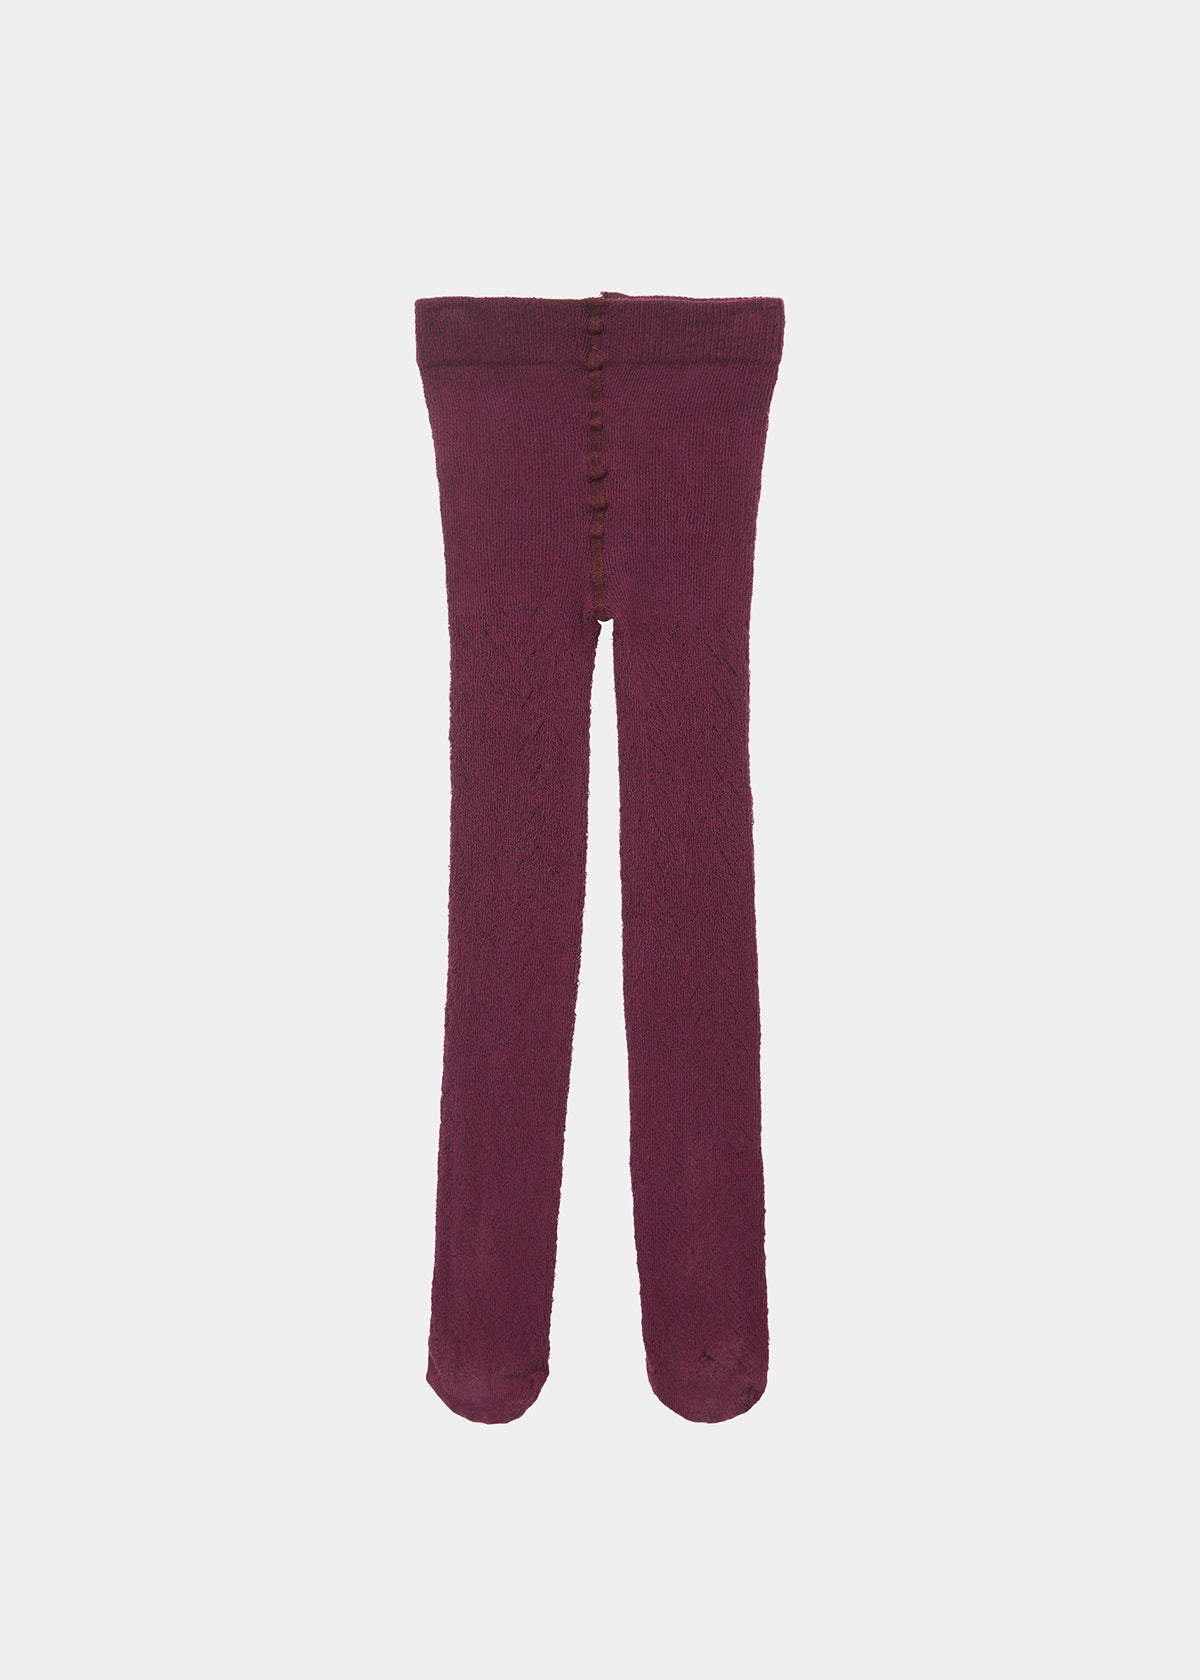 BABY POINTELLE TIGHTS - PLUM (FRONT)